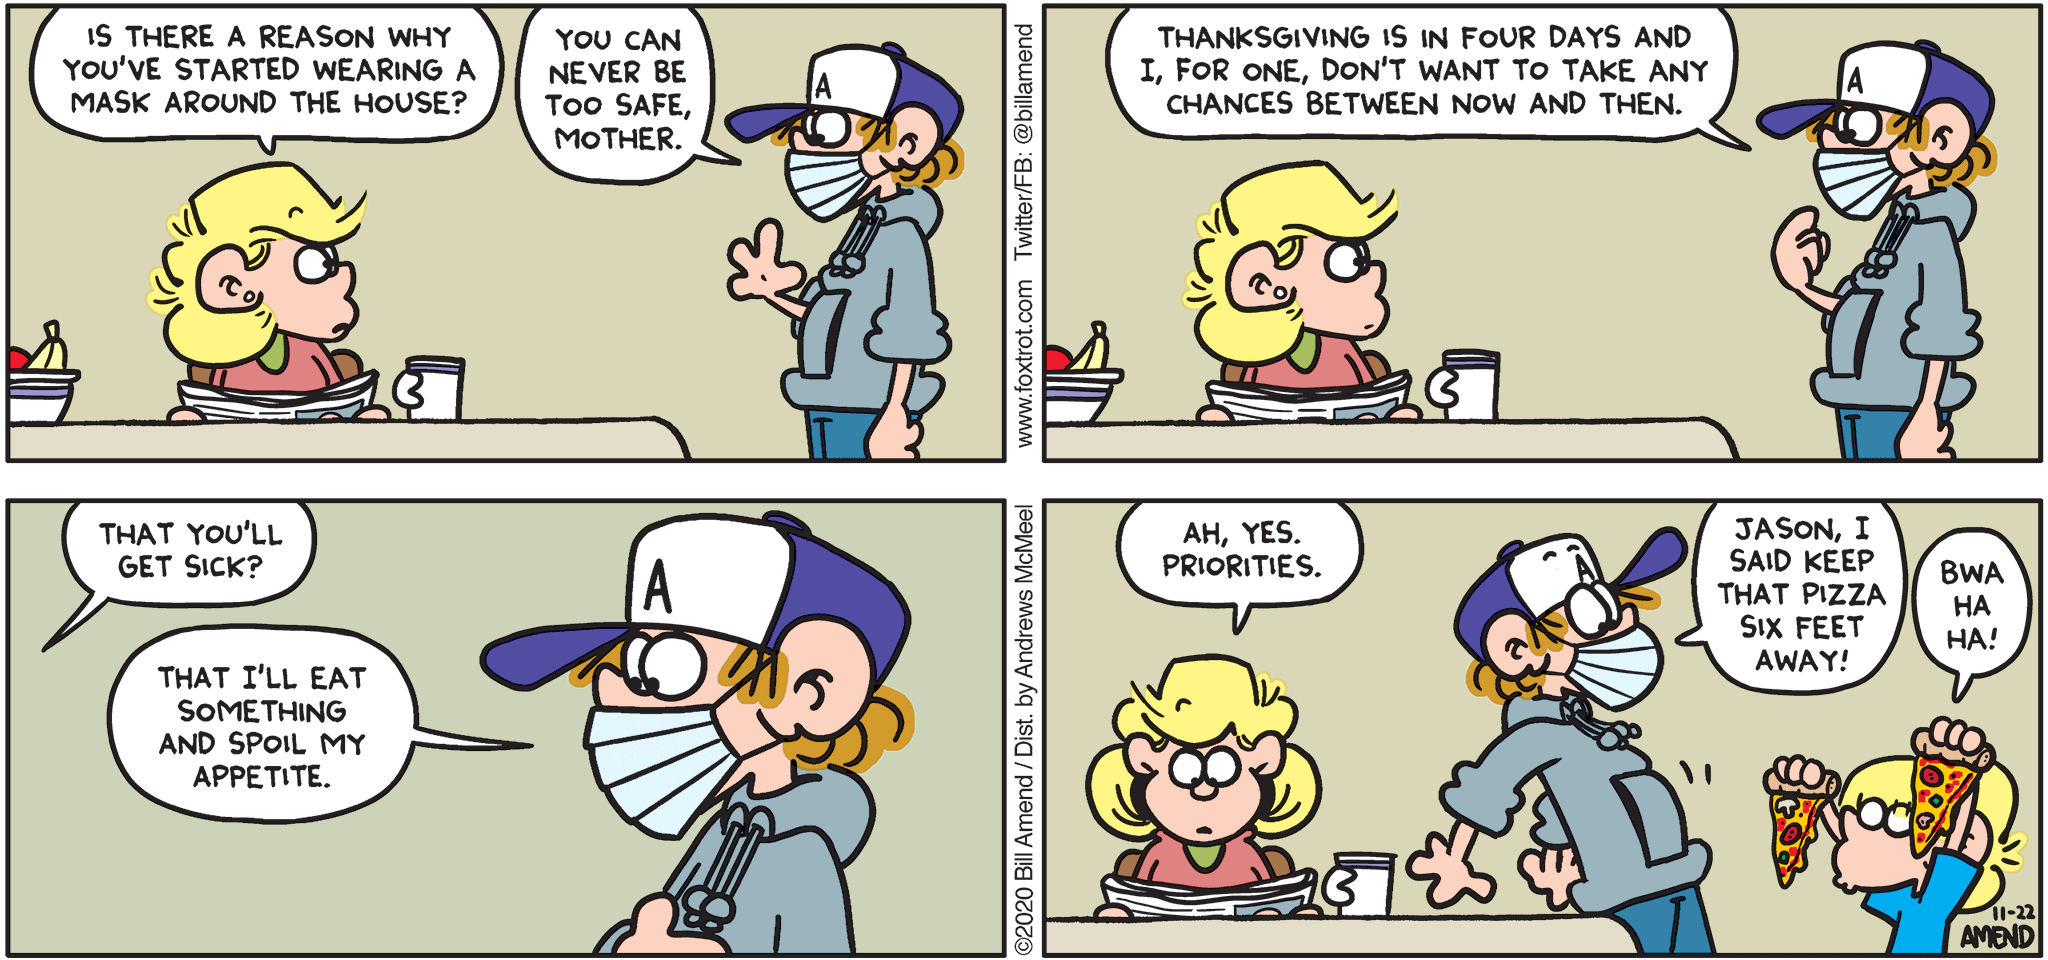 FoxTrot comic strip by Bill Amend - "Playing It Safe" published November 22, 2020 - Andy Fox: Is there a reason why you've started wearing a mask around the house? Peter Fox: You can never be too safe, mother. Thanksgiving is in four days and I, for one, don't want to take any chances between now and then. Andy Fox: That you'll get sick? Peter Fox: That I'll eat something and spoil my appetite. Andy Fox: Ah, yes. Priorities. Peter Fox: Jason, I said keep that pizza six feet away! Jason Fox: Bwa ha ha!